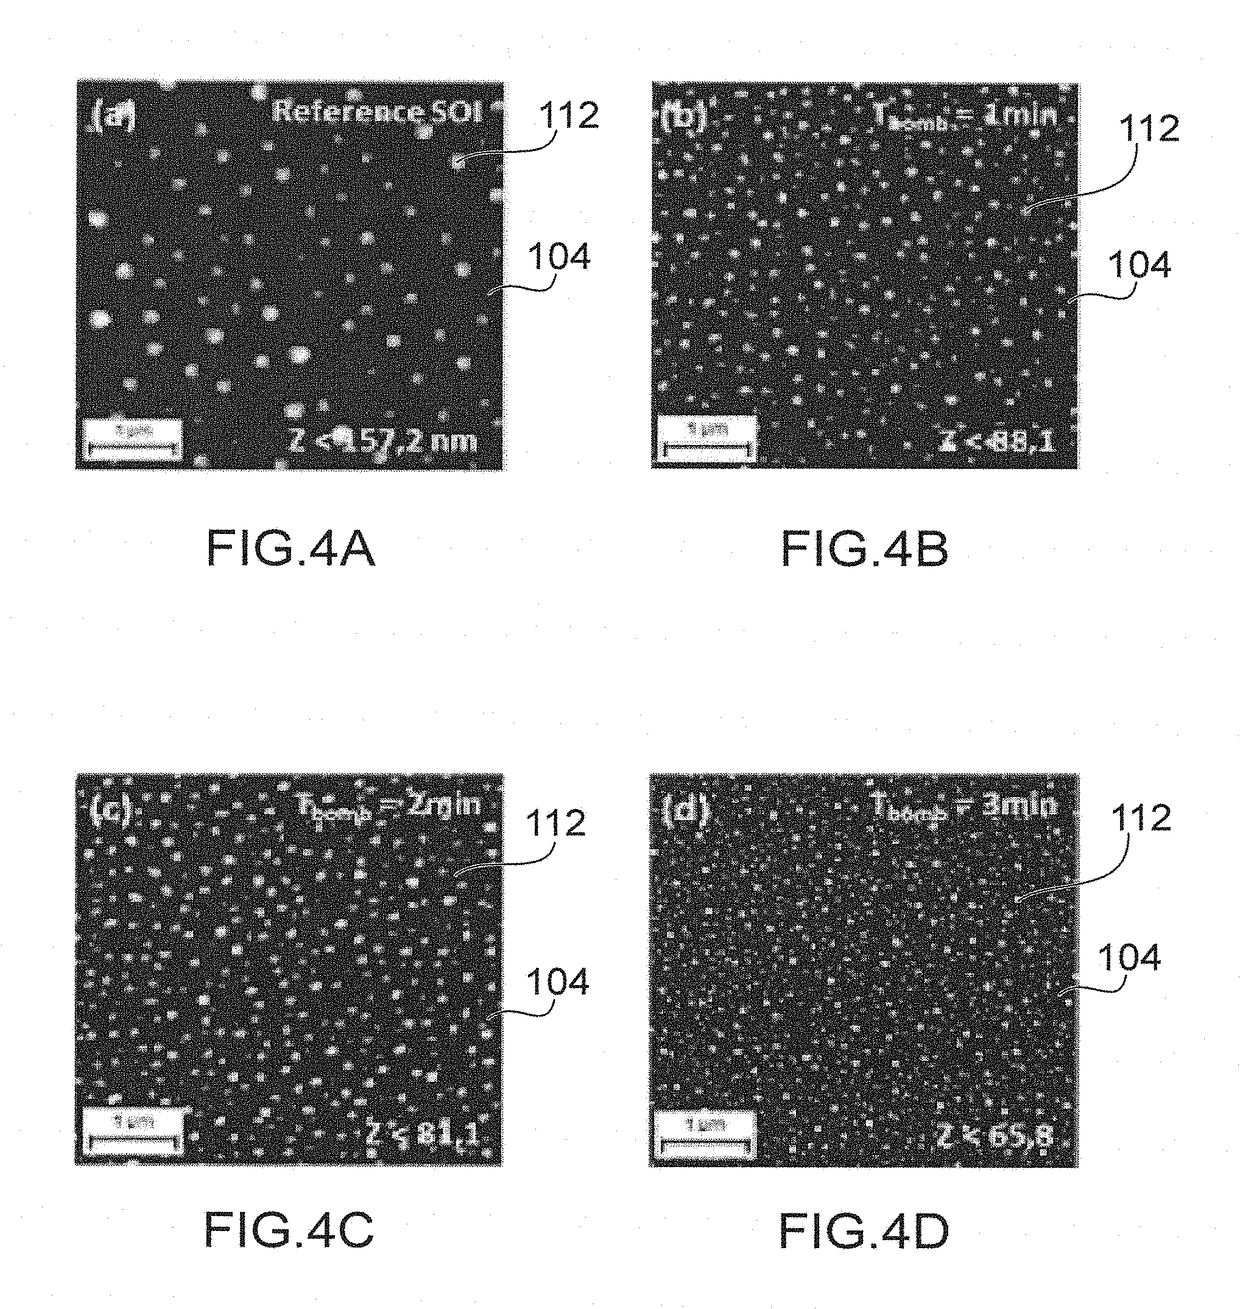 Method for producing nanocrystals with controlled dimensions and density